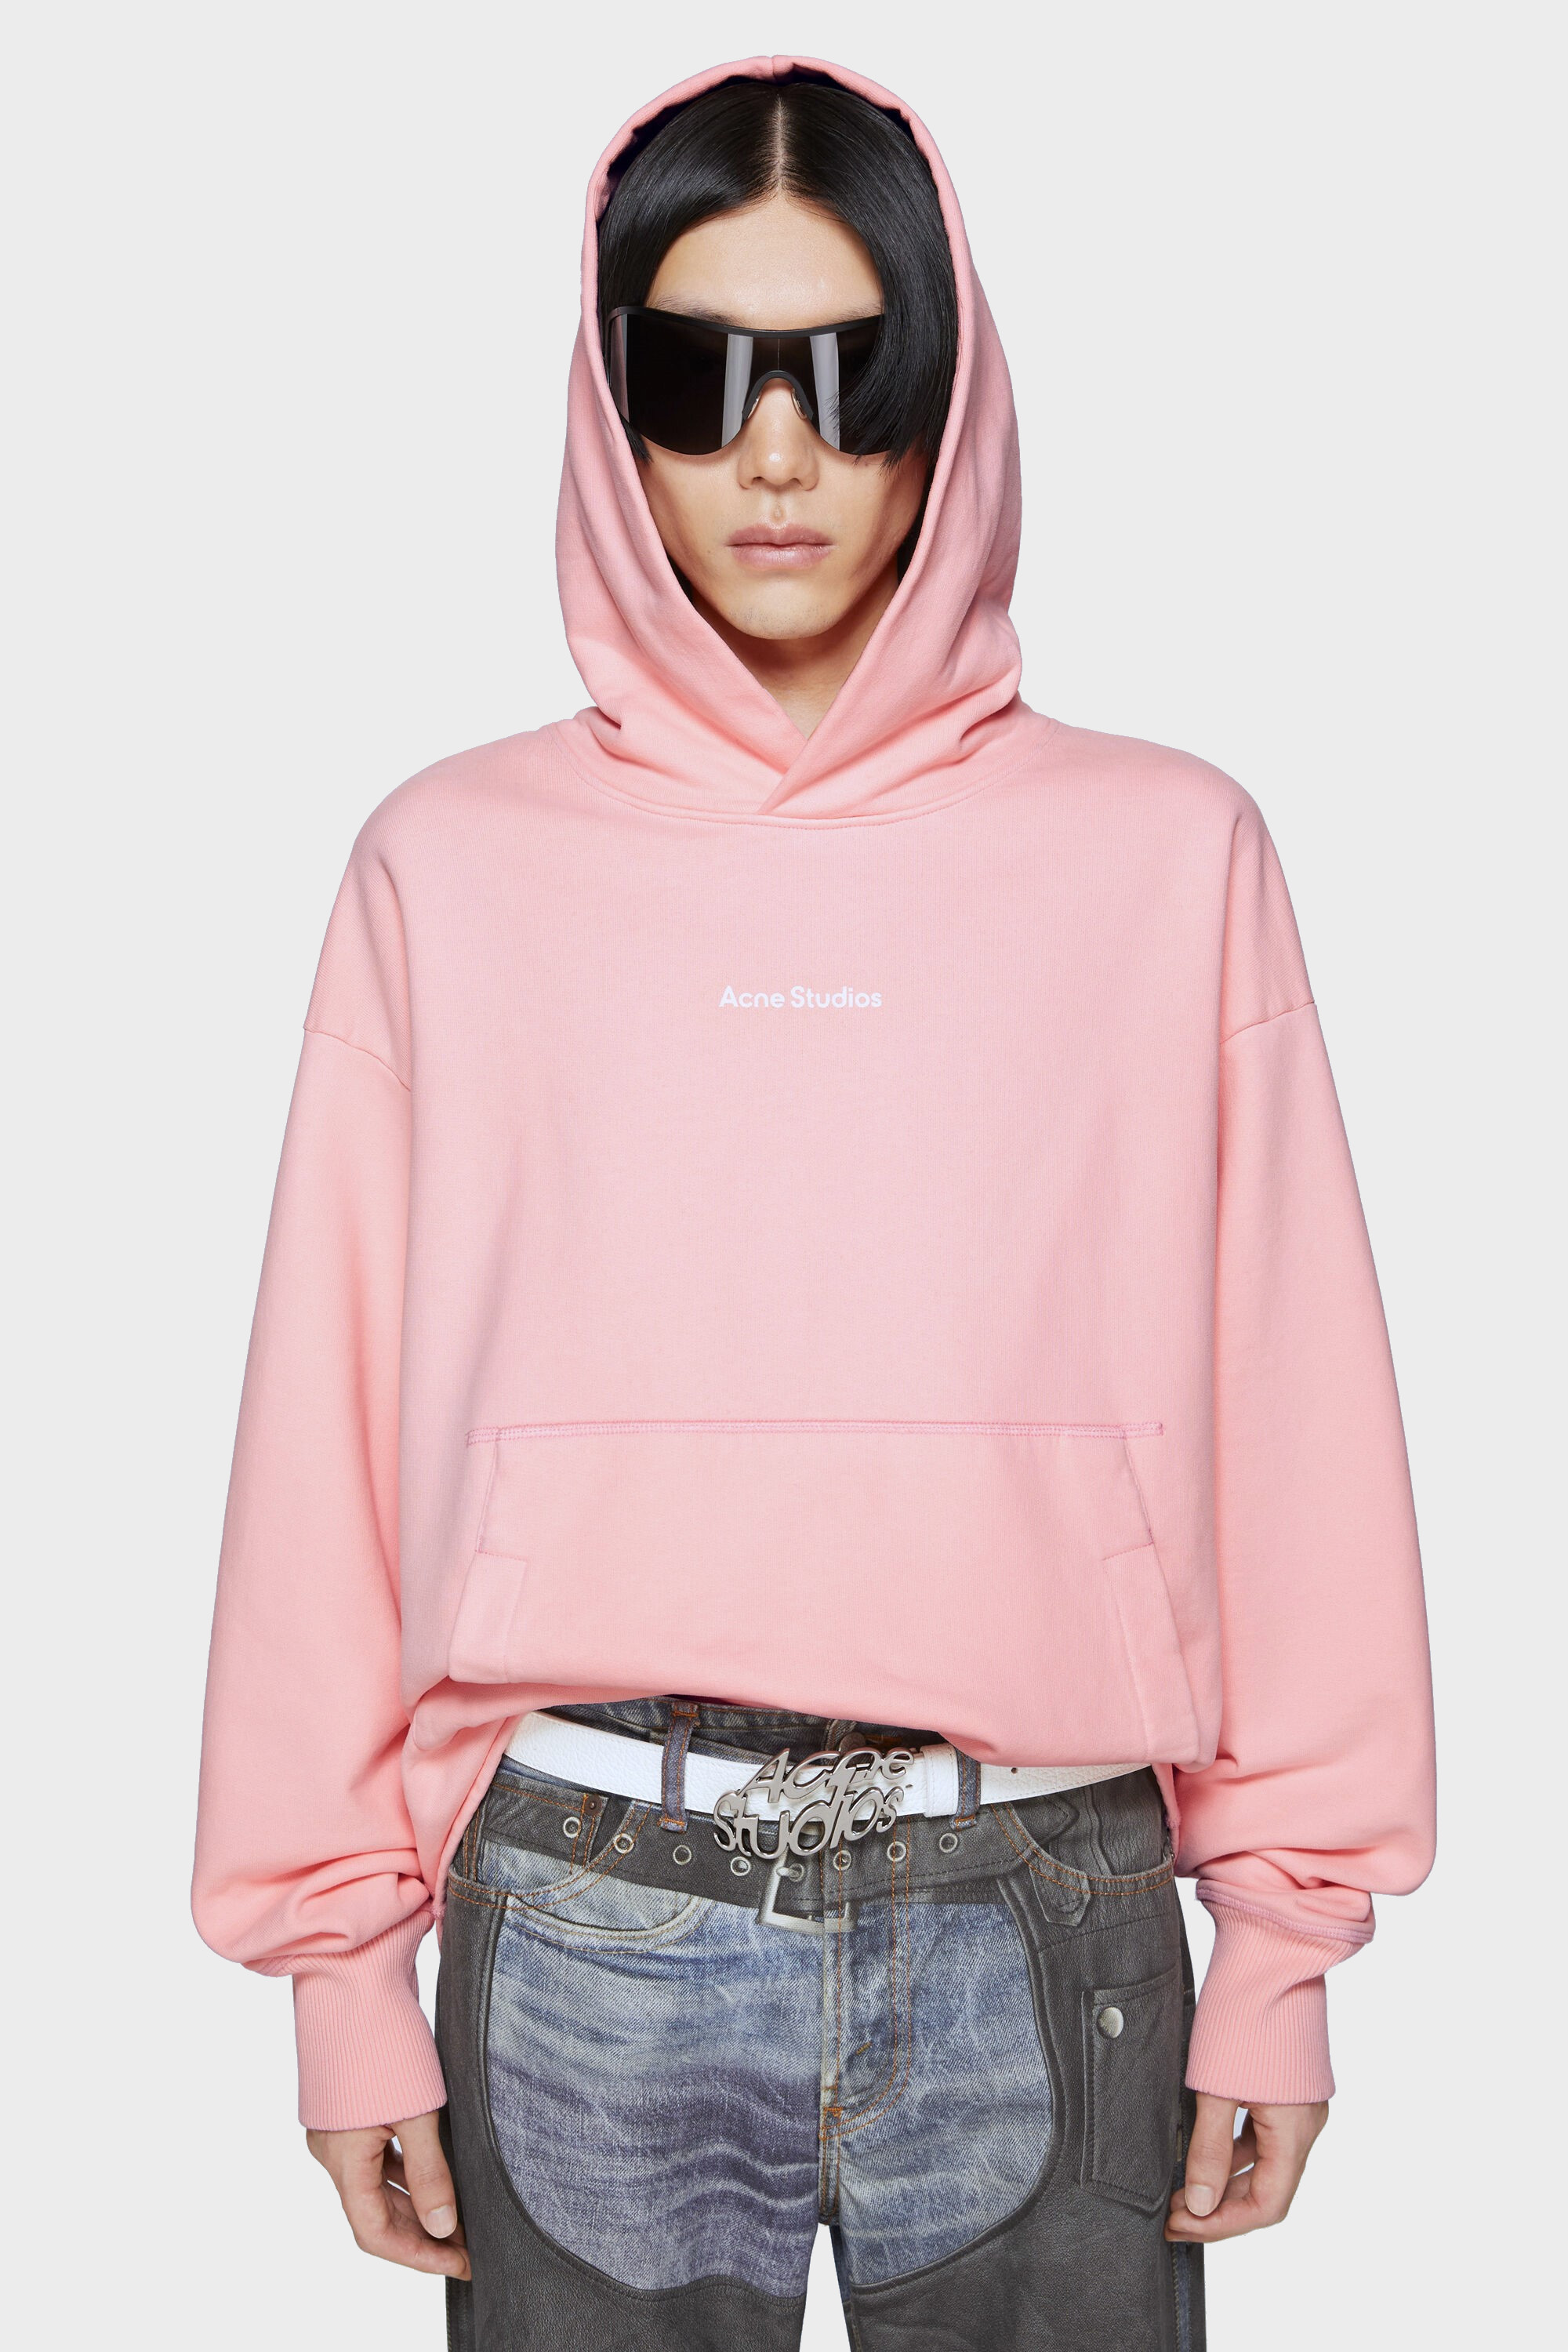 ACNE STUDIOS Stamp Oversize Sweathoodie in Pale Pink XL